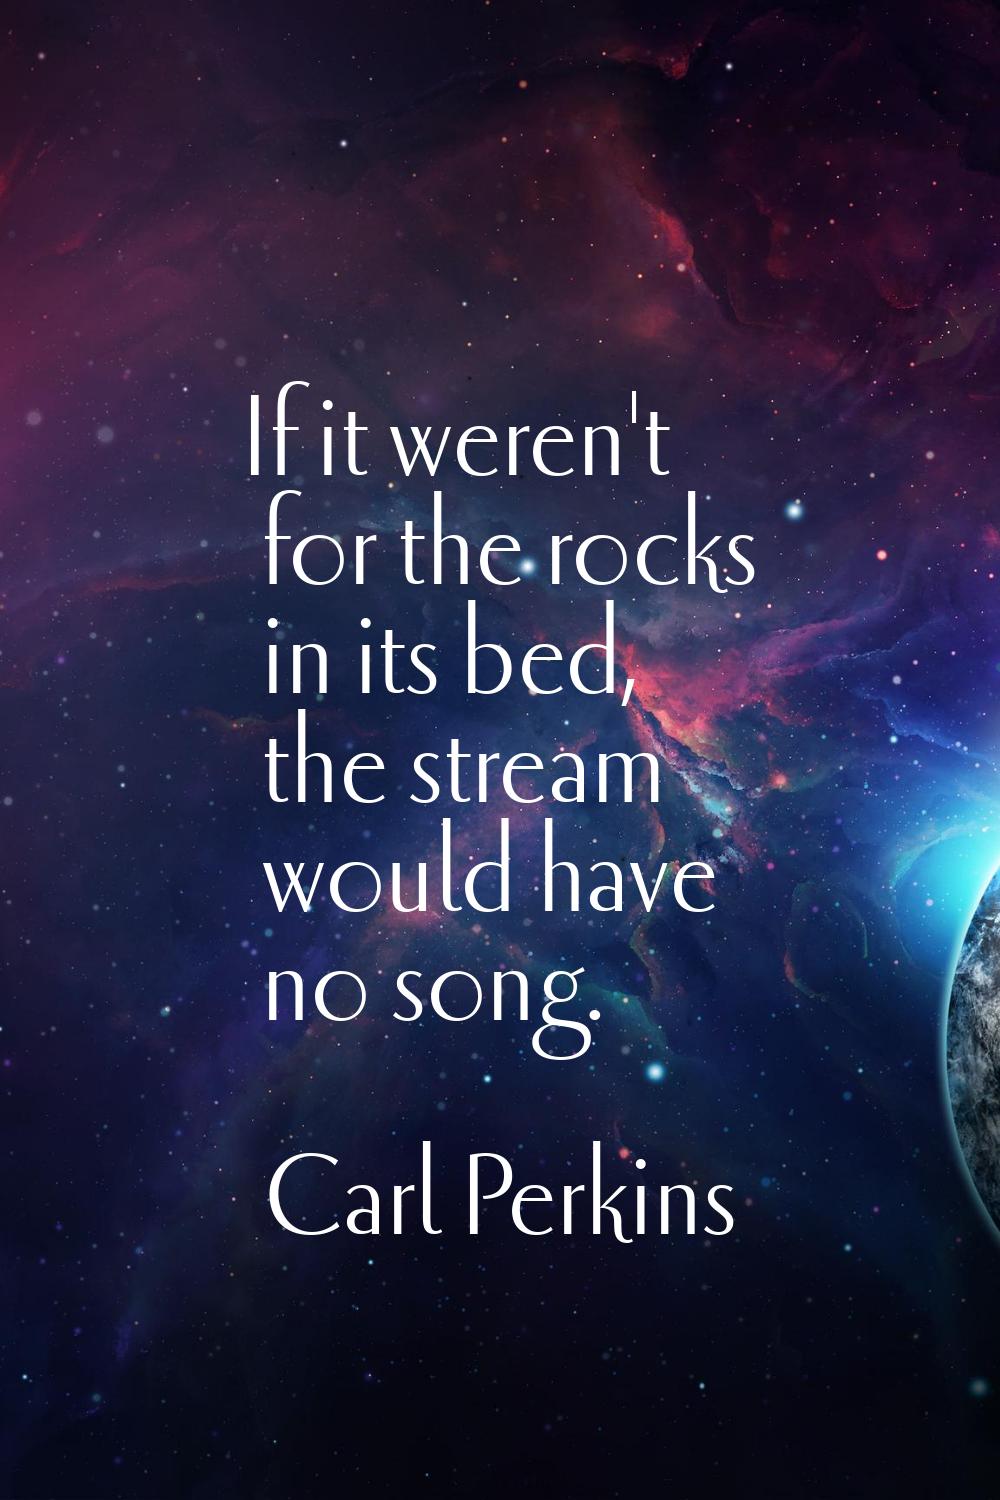 If it weren't for the rocks in its bed, the stream would have no song.